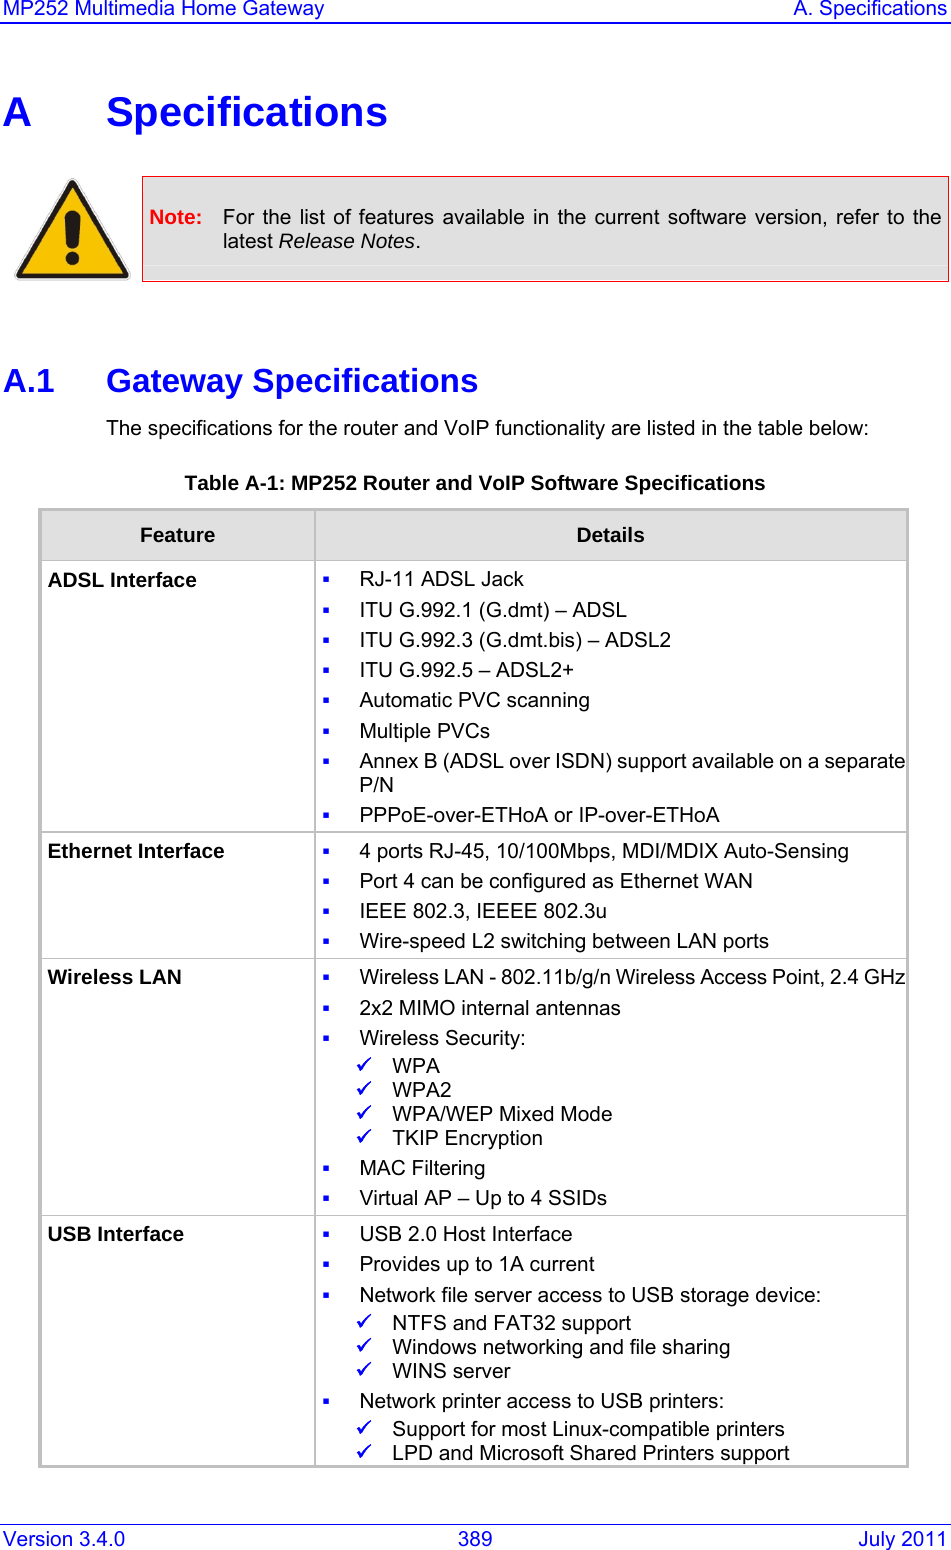 Version 3.4.0  389  July 2011 MP252 Multimedia Home Gateway  A. Specifications  A Specifications    Note:  For the list of features available in the current software version, refer to the latest Release Notes.   A.1 Gateway Specifications The specifications for the router and VoIP functionality are listed in the table below: Table A-1: MP252 Router and VoIP Software Specifications Feature  Details ADSL Interface   RJ-11 ADSL Jack  ITU G.992.1 (G.dmt) – ADSL  ITU G.992.3 (G.dmt.bis) – ADSL2  ITU G.992.5 – ADSL2+  Automatic PVC scanning  Multiple PVCs  Annex B (ADSL over ISDN) support available on a separateP/N  PPPoE-over-ETHoA or IP-over-ETHoA Ethernet Interface   4 ports RJ-45, 10/100Mbps, MDI/MDIX Auto-Sensing  Port 4 can be configured as Ethernet WAN  IEEE 802.3, IEEEE 802.3u  Wire-speed L2 switching between LAN ports Wireless LAN   Wireless LAN - 802.11b/g/n Wireless Access Point, 2.4 GHz 2x2 MIMO internal antennas  Wireless Security: 9 WPA 9 WPA2 9 WPA/WEP Mixed Mode 9 TKIP Encryption  MAC Filtering  Virtual AP – Up to 4 SSIDs USB Interface   USB 2.0 Host Interface  Provides up to 1A current  Network file server access to USB storage device: 9 NTFS and FAT32 support 9 Windows networking and file sharing 9 WINS server  Network printer access to USB printers: 9 Support for most Linux-compatible printers 9 LPD and Microsoft Shared Printers support 